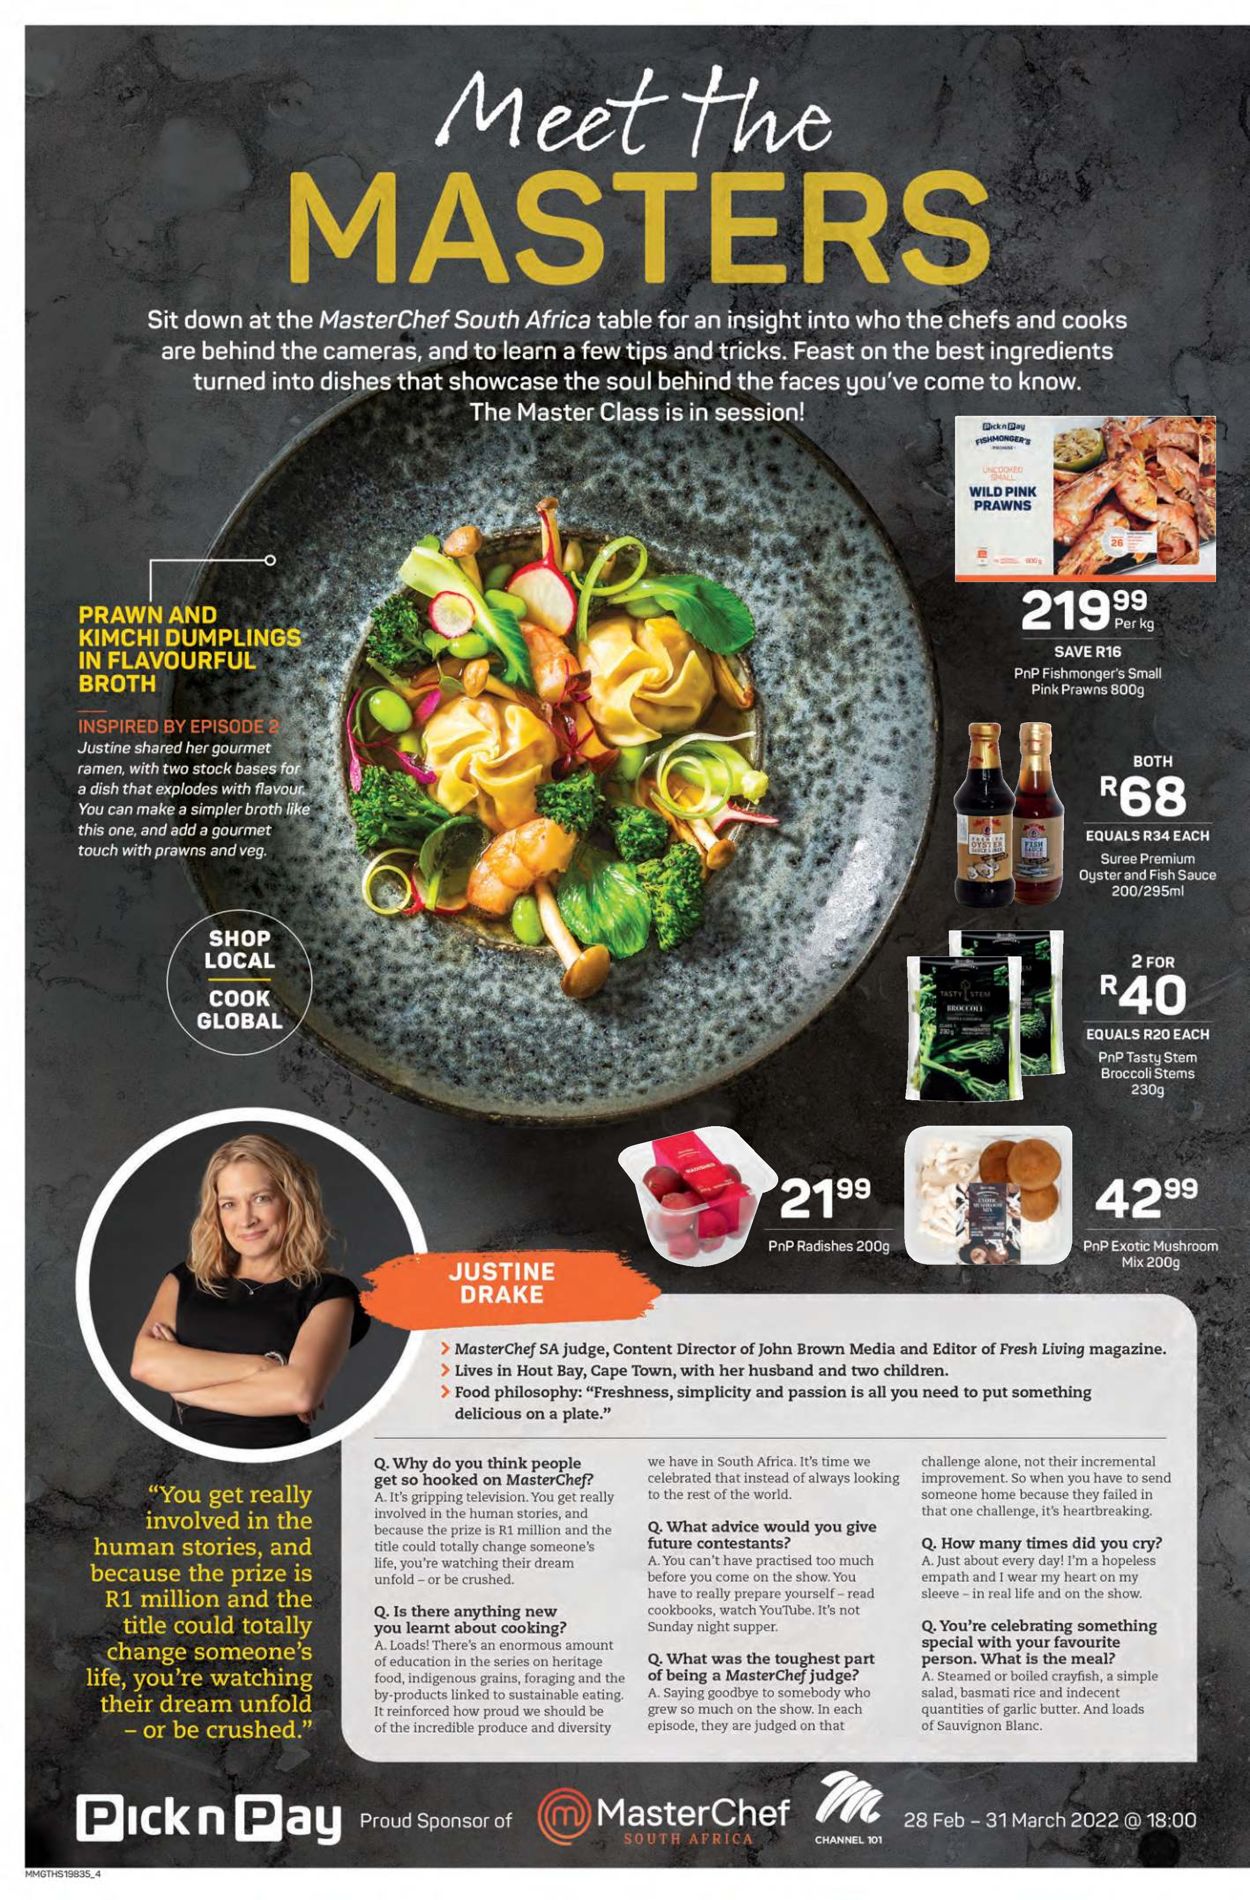 Pick n Pay Catalogue - 2022/03/23-2022/03/27 (Page 4)